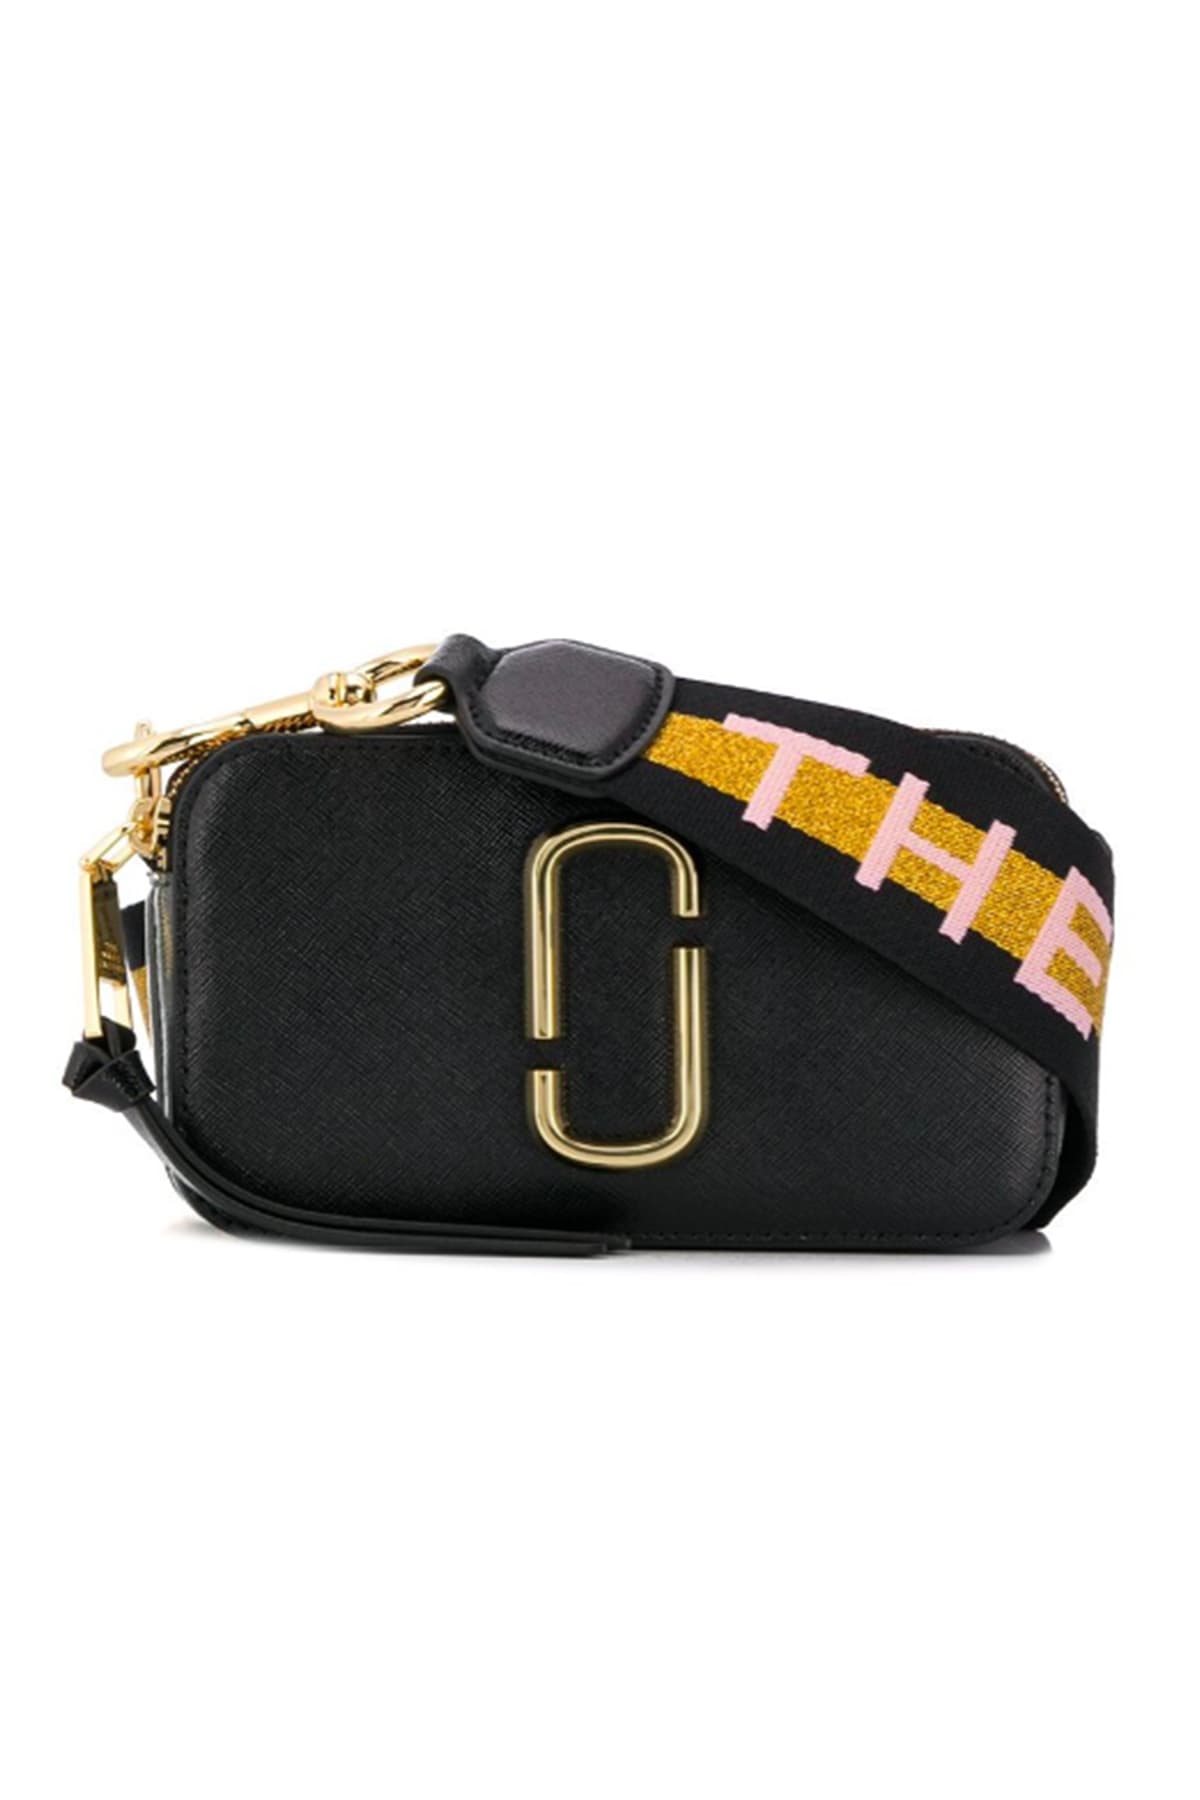 Marc Jacobs Bag The Snapshot In New Black Multi